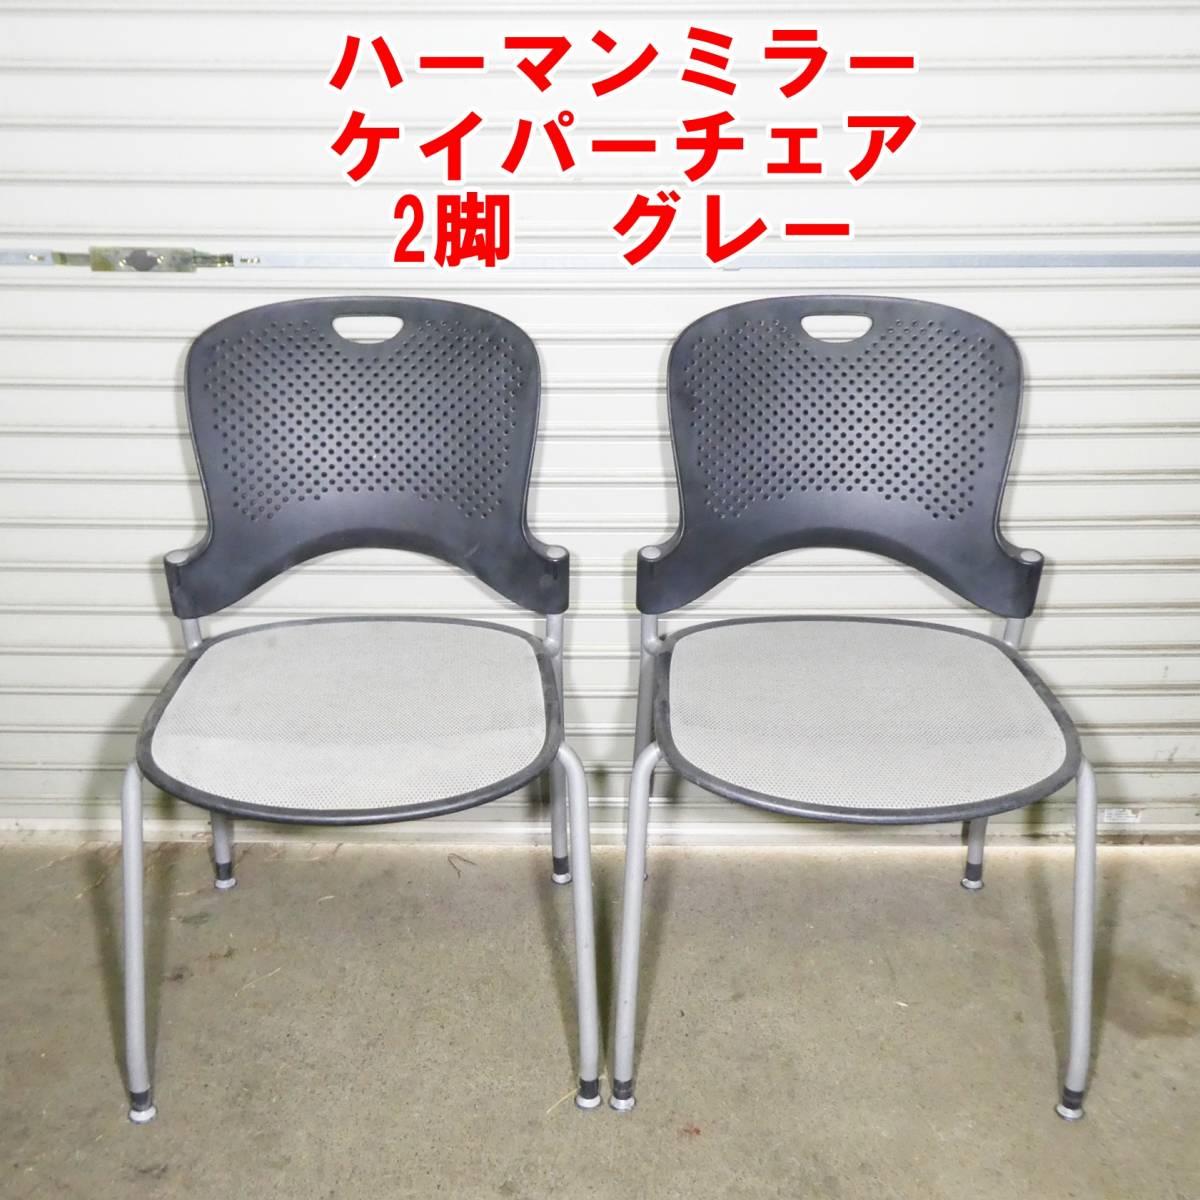 US442[ pick up limitation ]Herman Miller Herman Miller Kei pa- chair 2 legs gray present condition /4